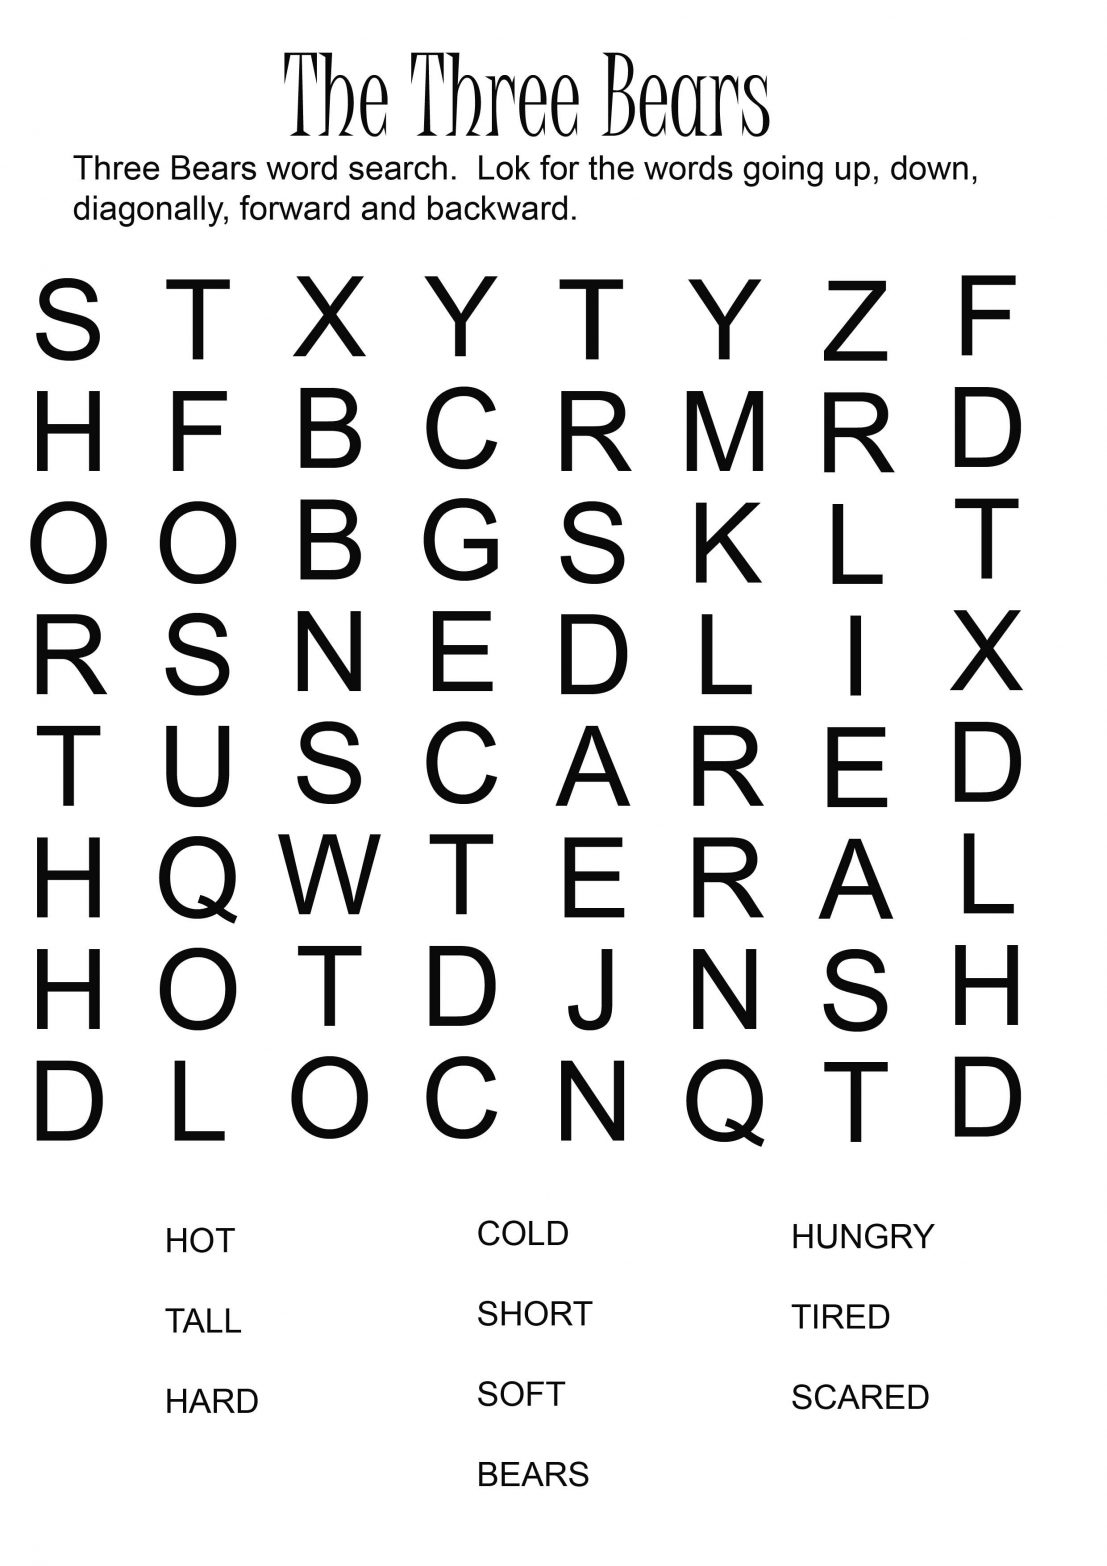 Simple Word Puzzles Printable Large Print | Www.topsimages - Free Printable Word Searches For Adults Large Print